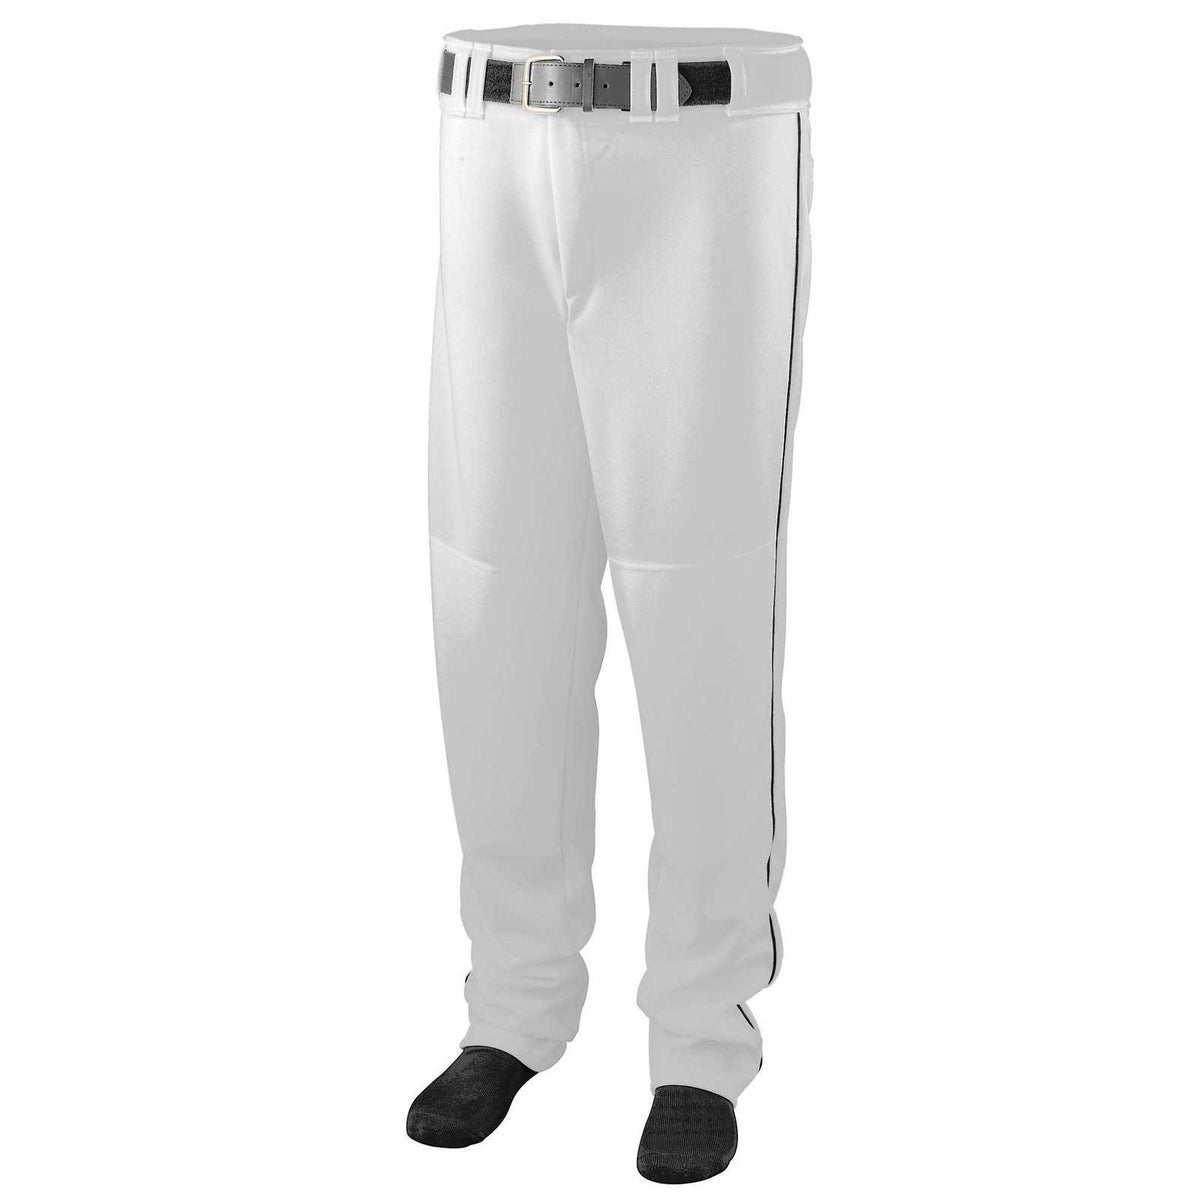 Augusta 1445 Series Baseball Softball Pant with Piping - White Black - HIT a Double